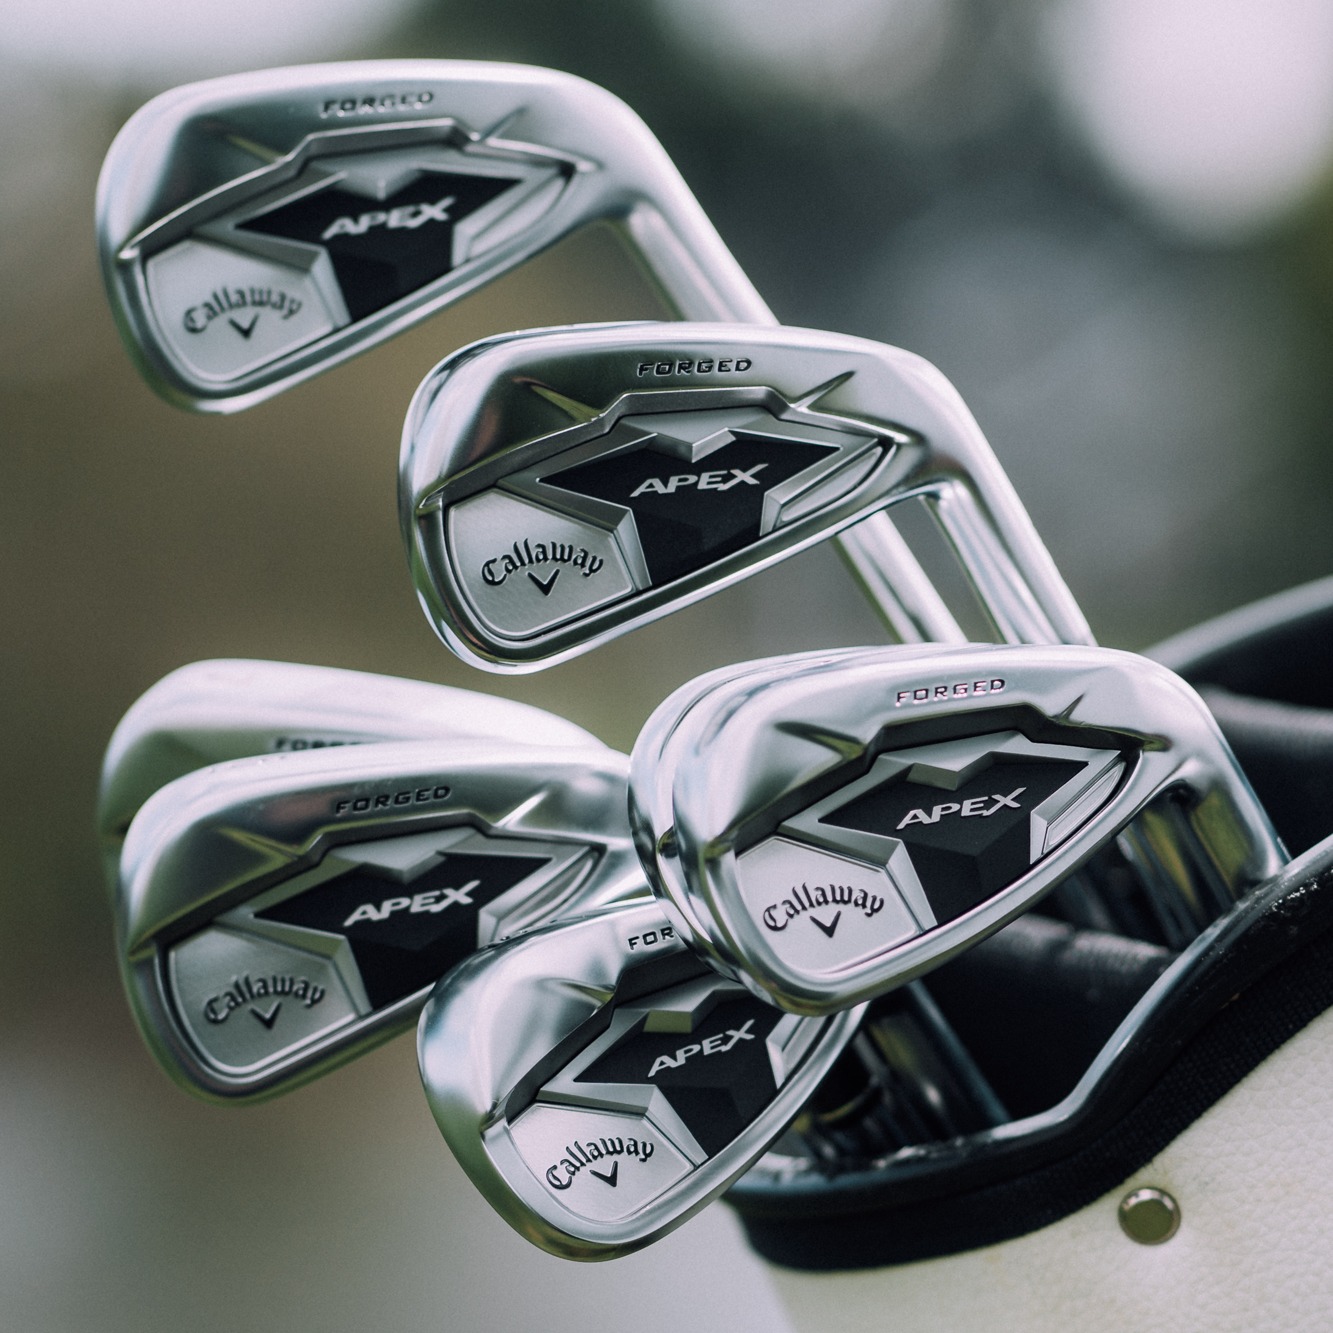 Callaway Golf Preowned Review Must Read This Before Buying